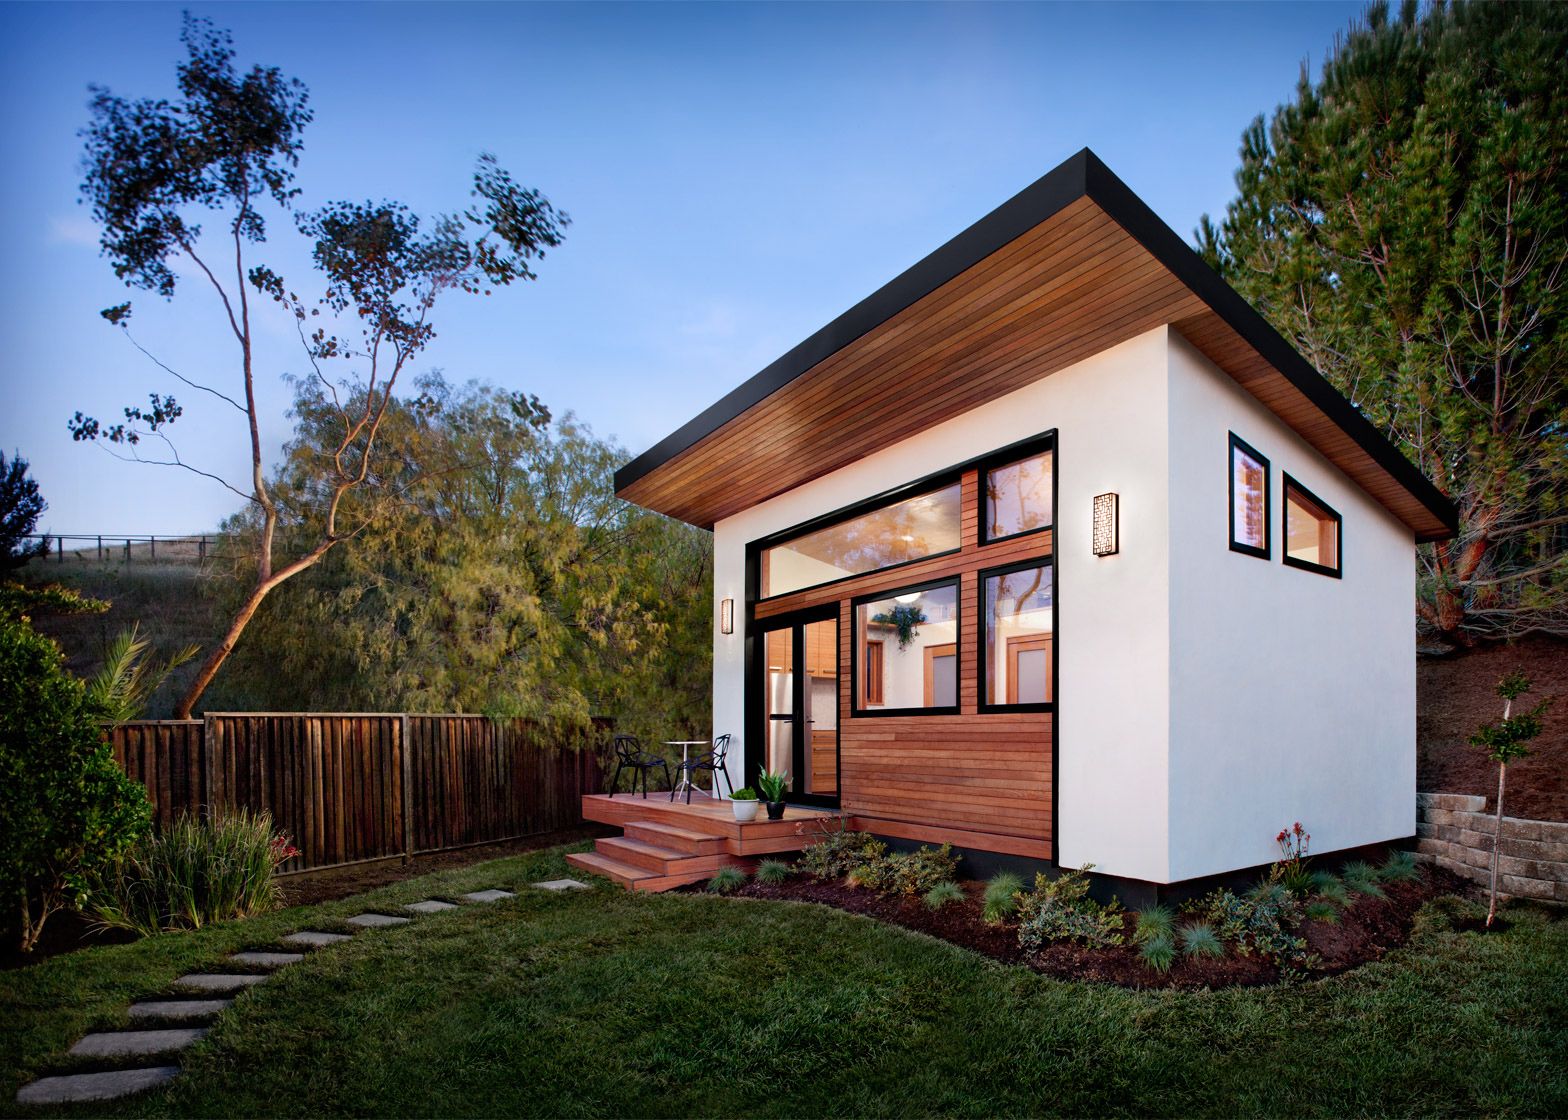 7 tiny homes you can buy for under $115k